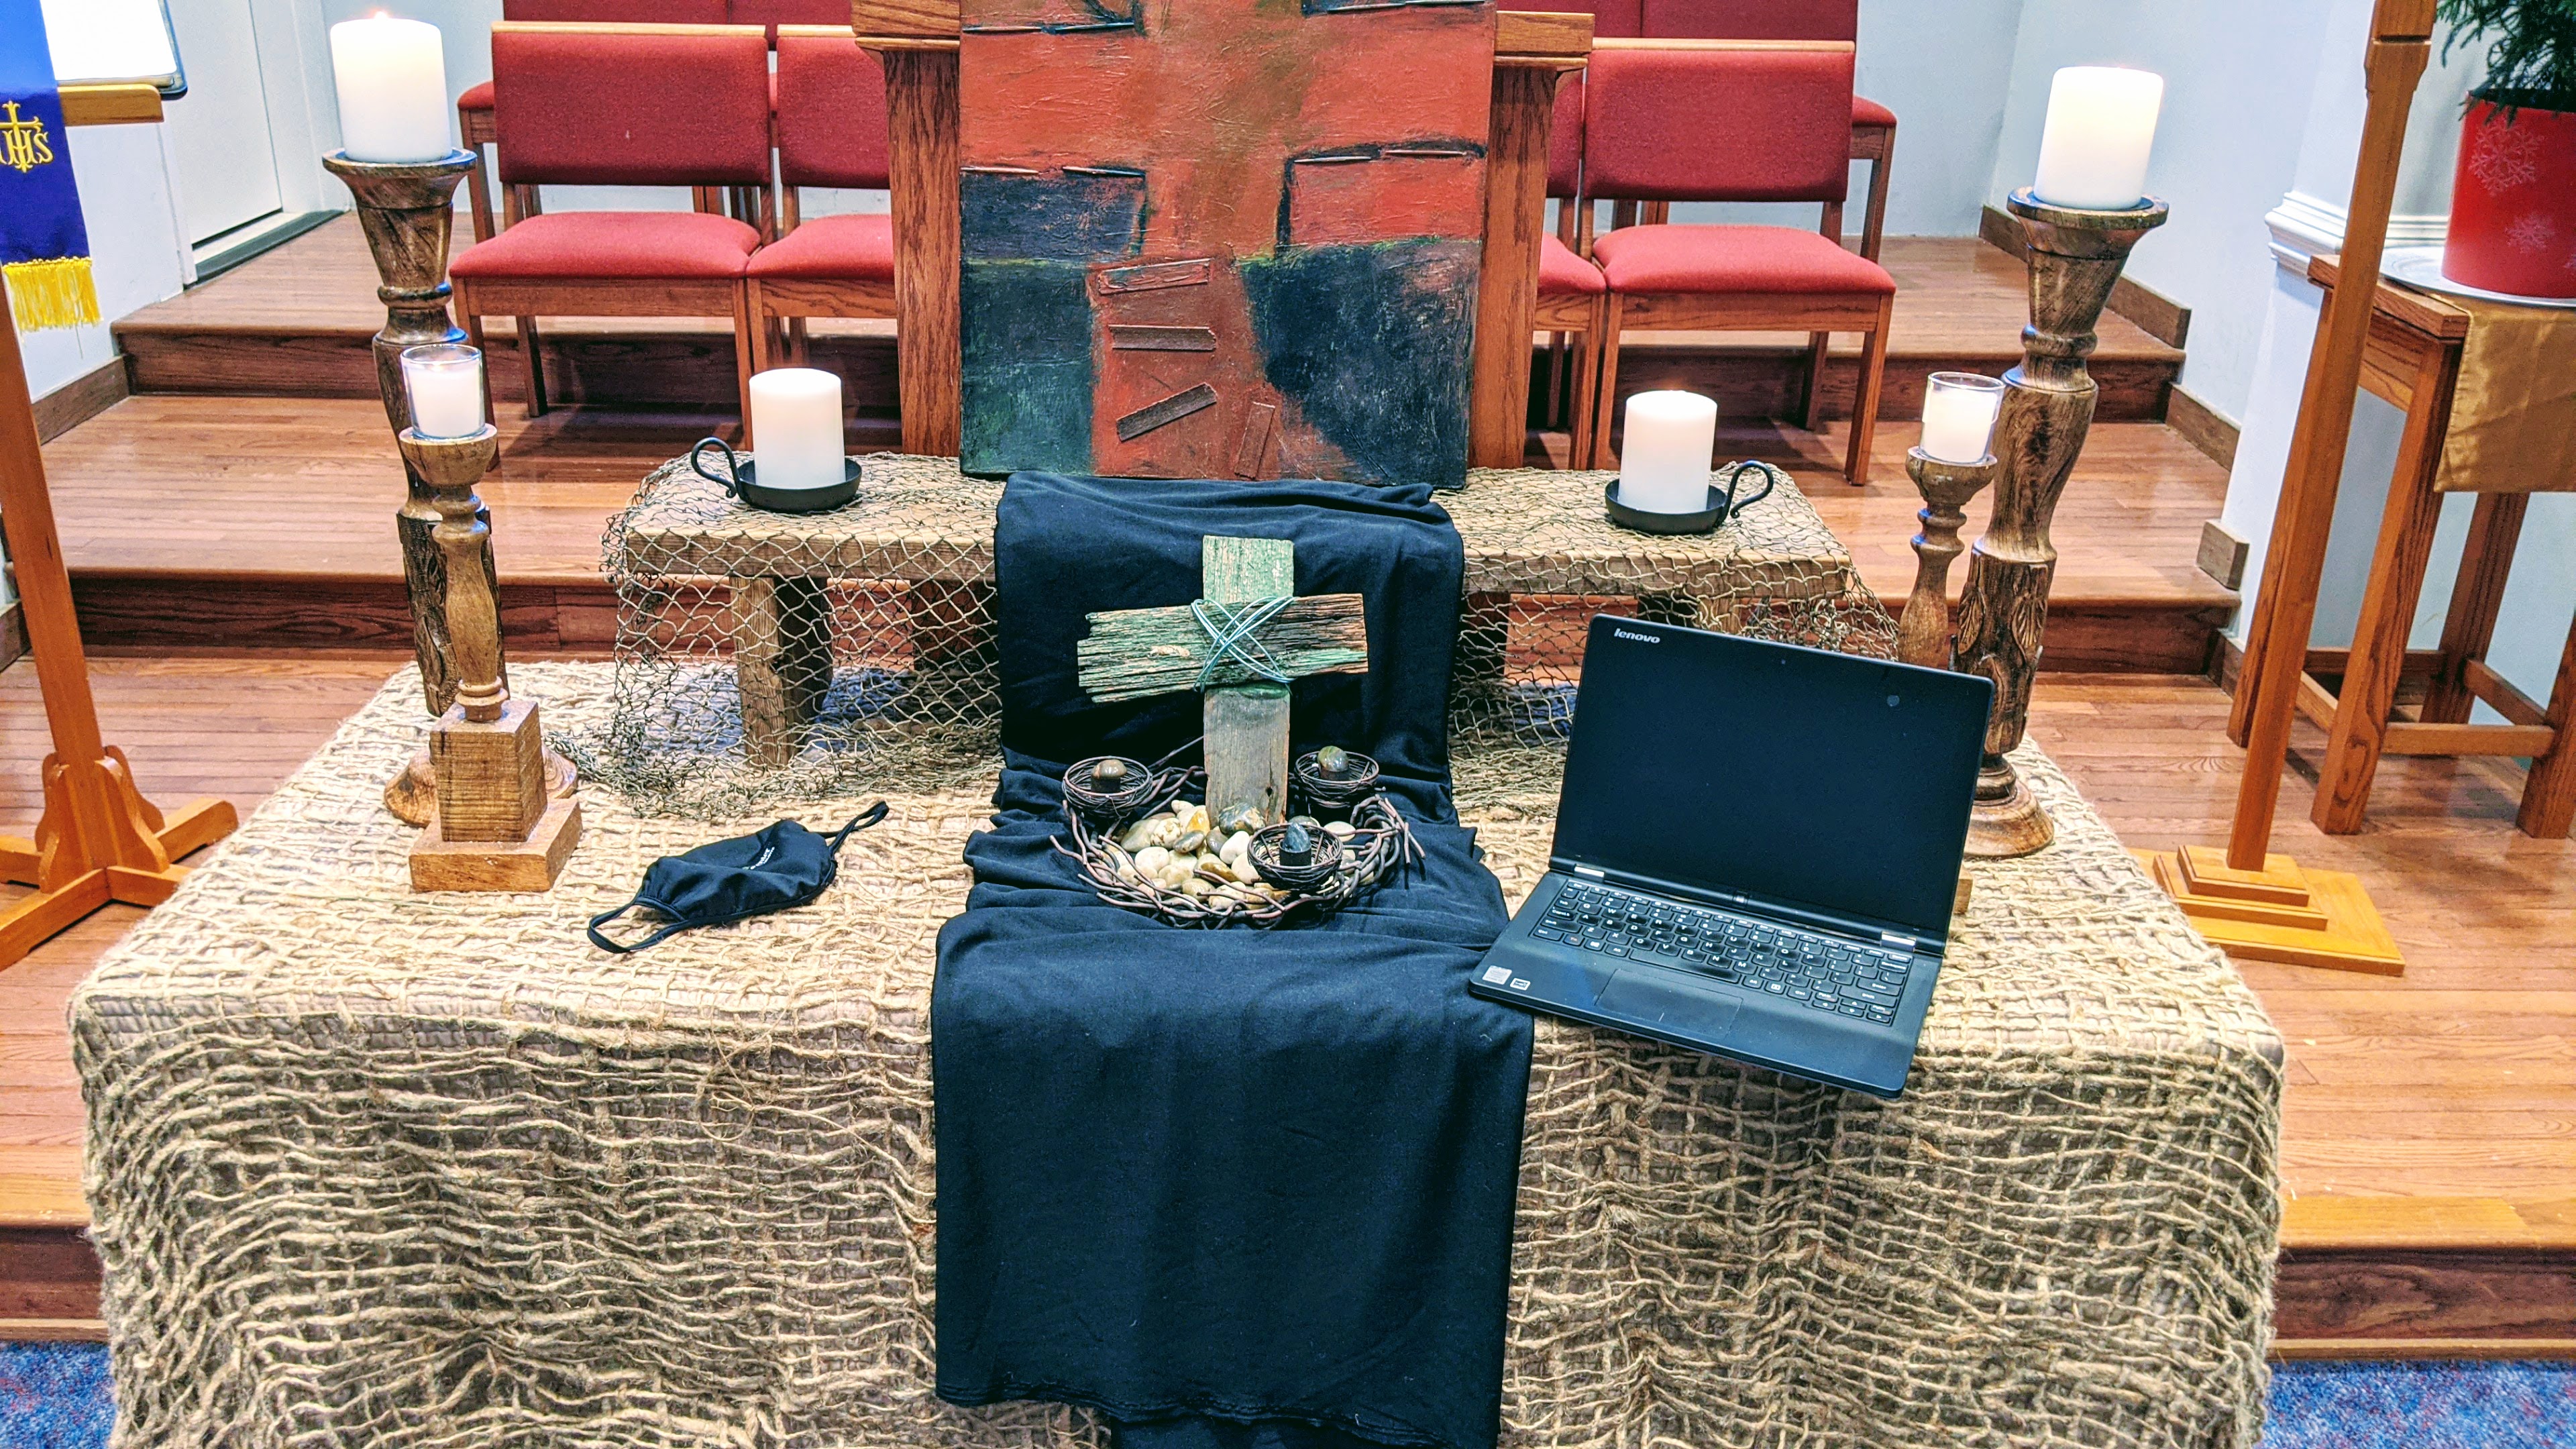 Bringing Life to Our Virtual Meetinghouse